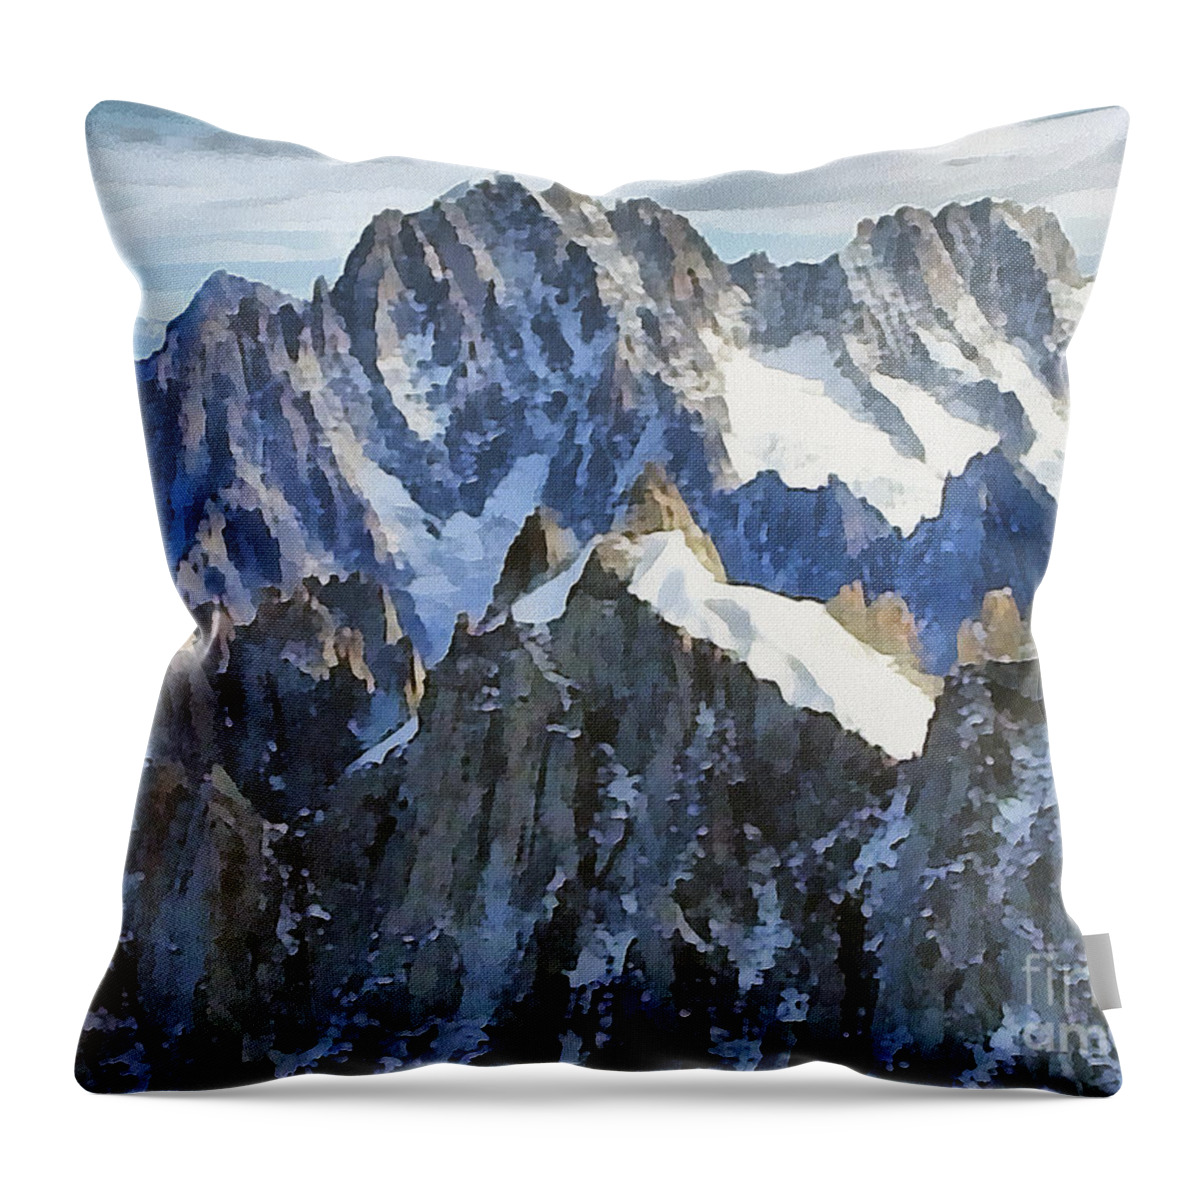 Illustration Throw Pillow featuring the painting The Alps by Odon Czintos